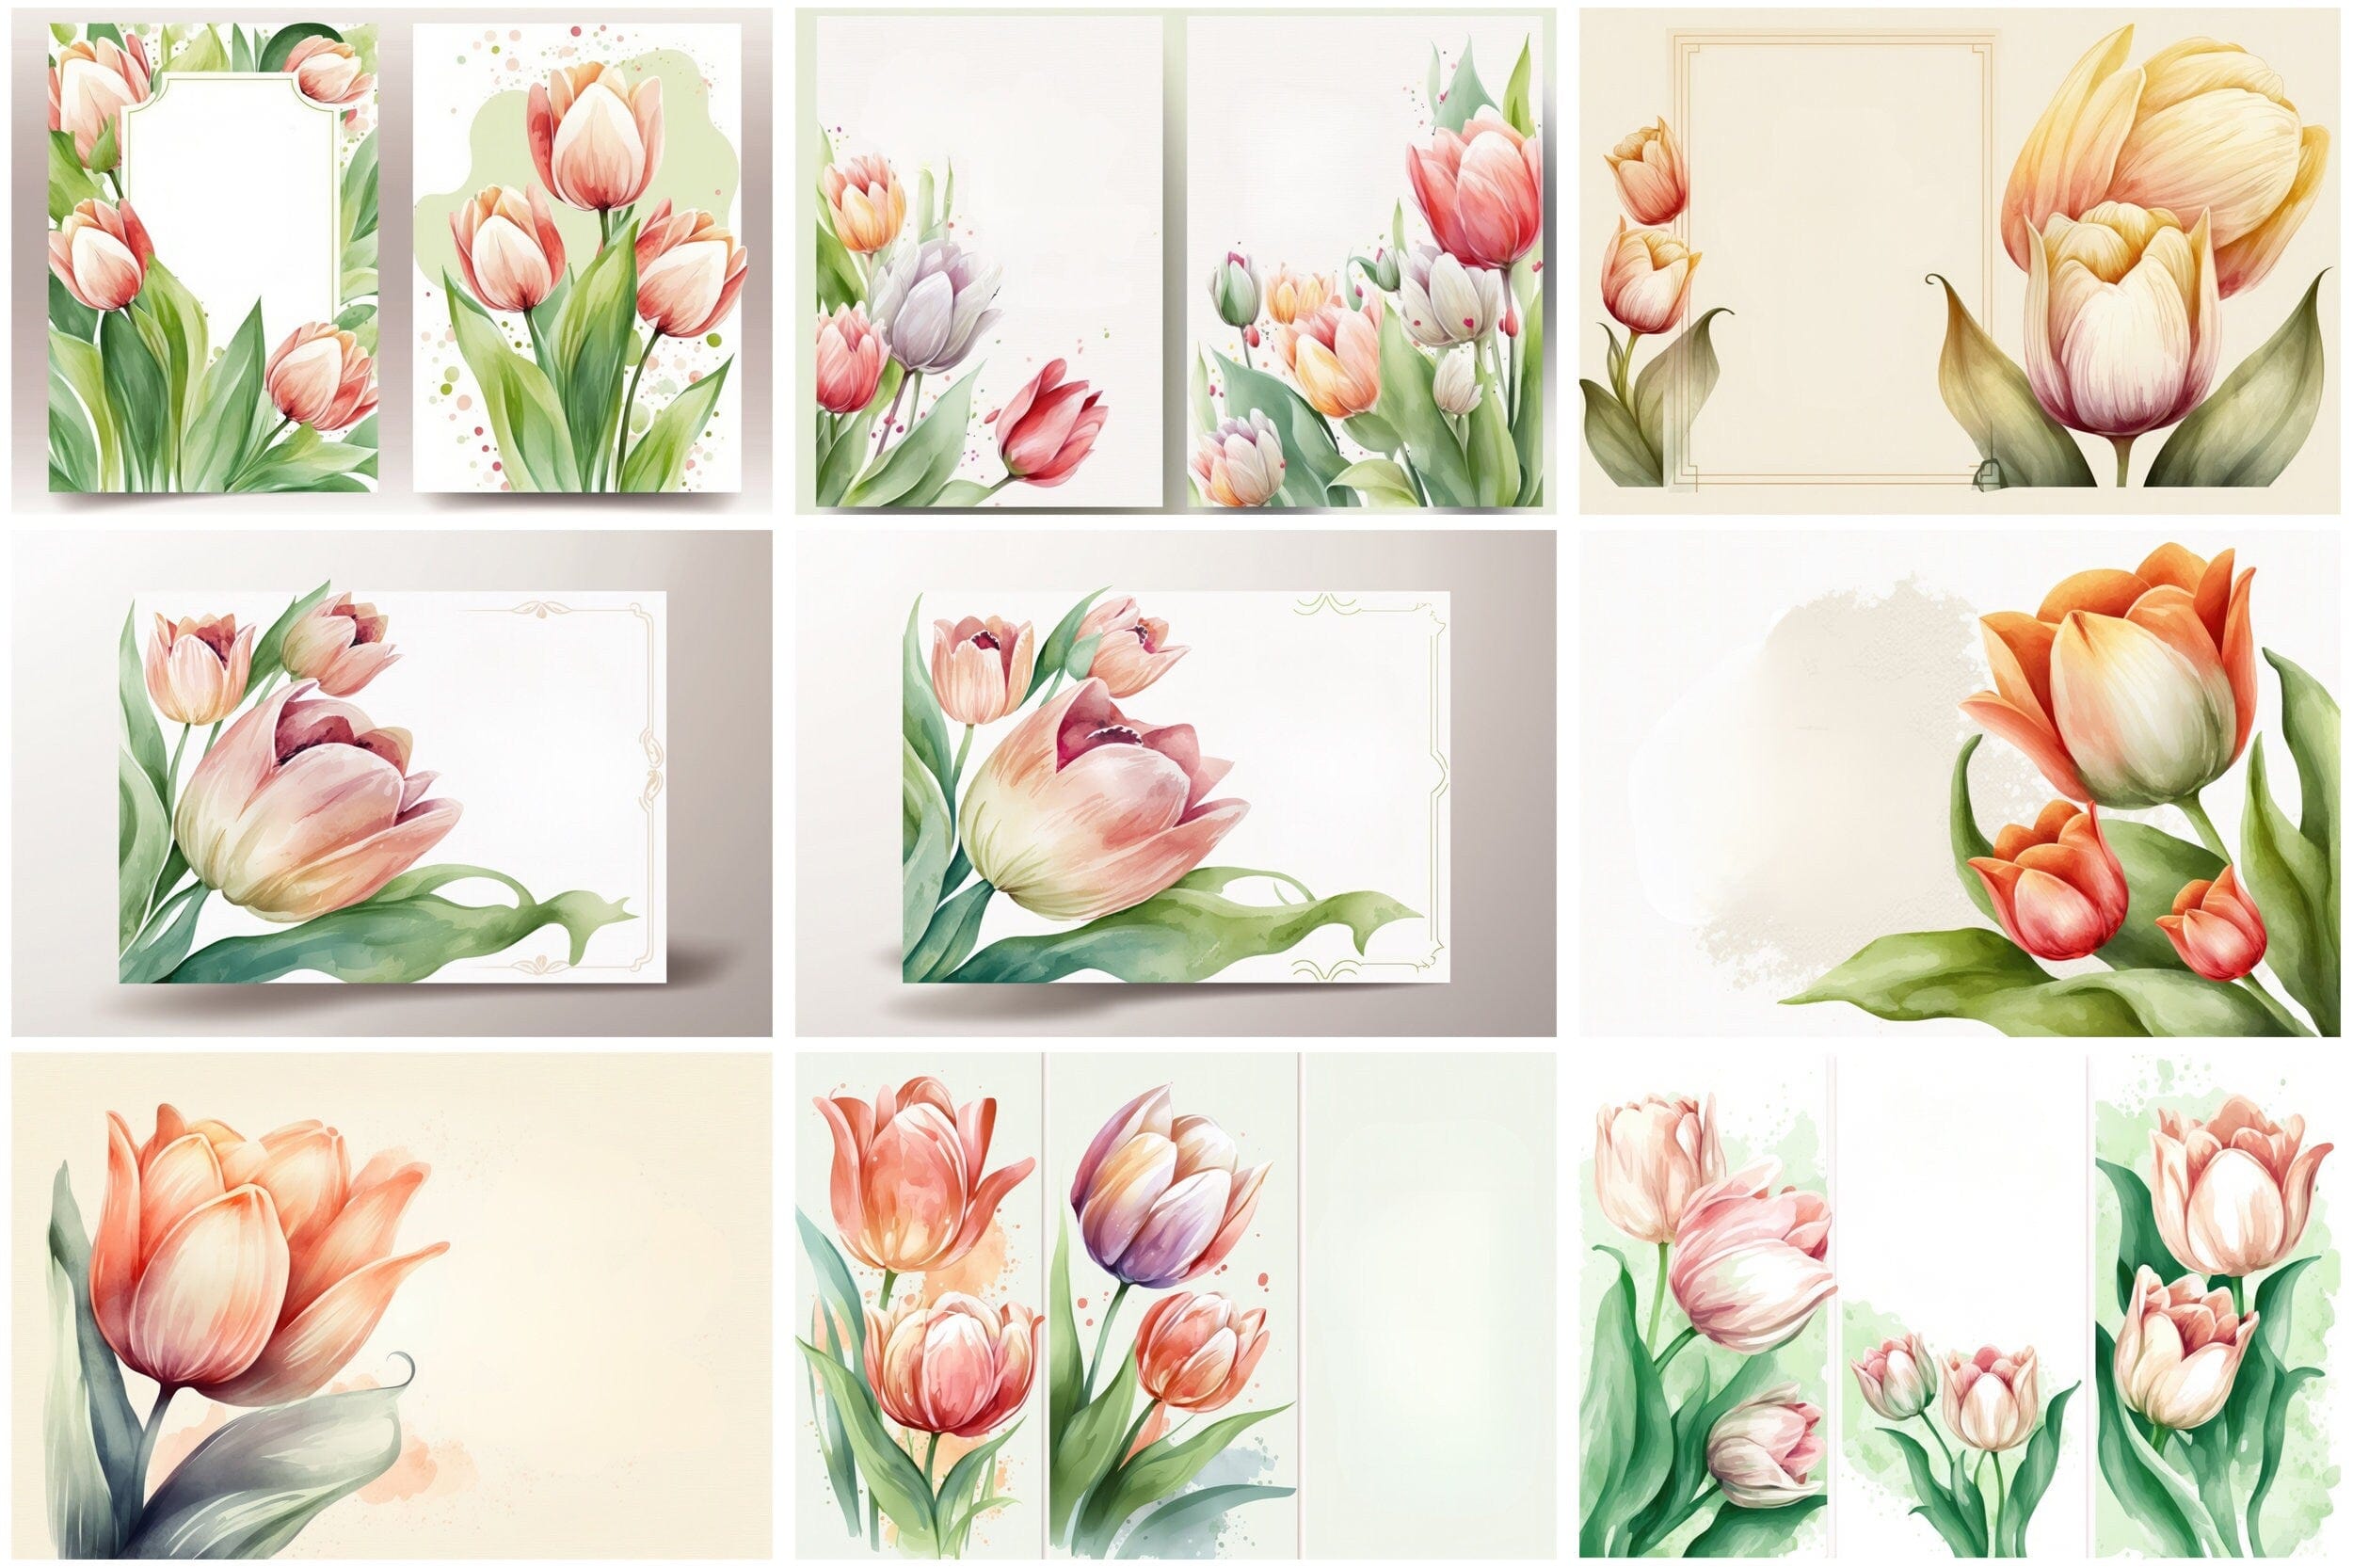 70 Stunning Tulip Images Bundle: Perfect for Banners & Cards - High-Resolution, Royalty-Free, and Ready for Instant Download Digital Download Sumobundle